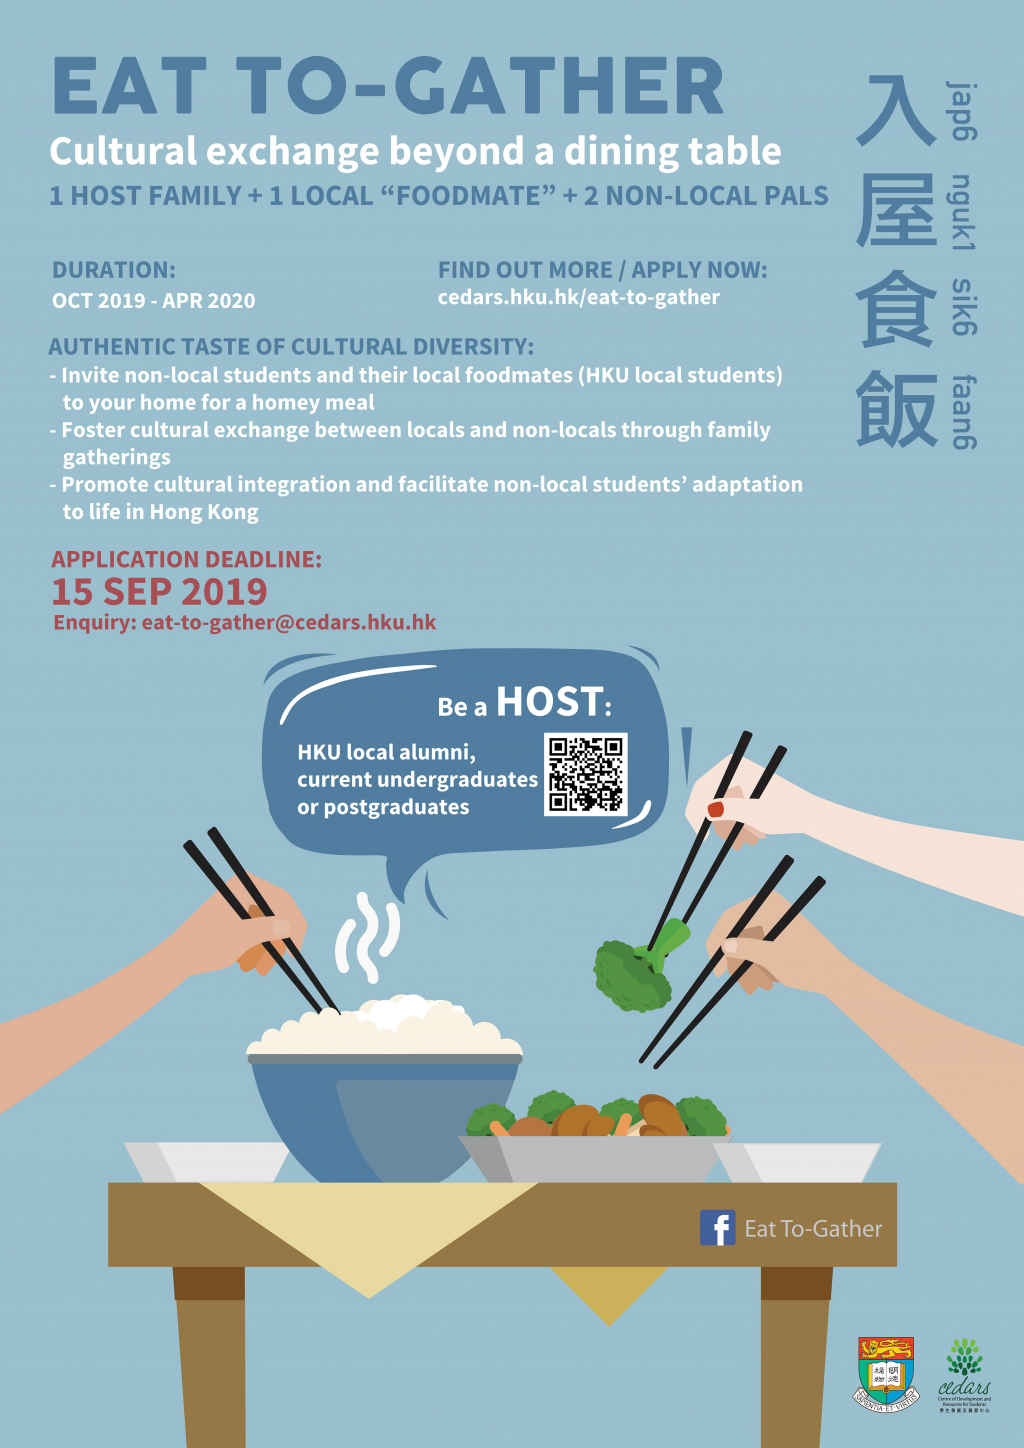 Eat To-Gather 2019-20: Calling for local host